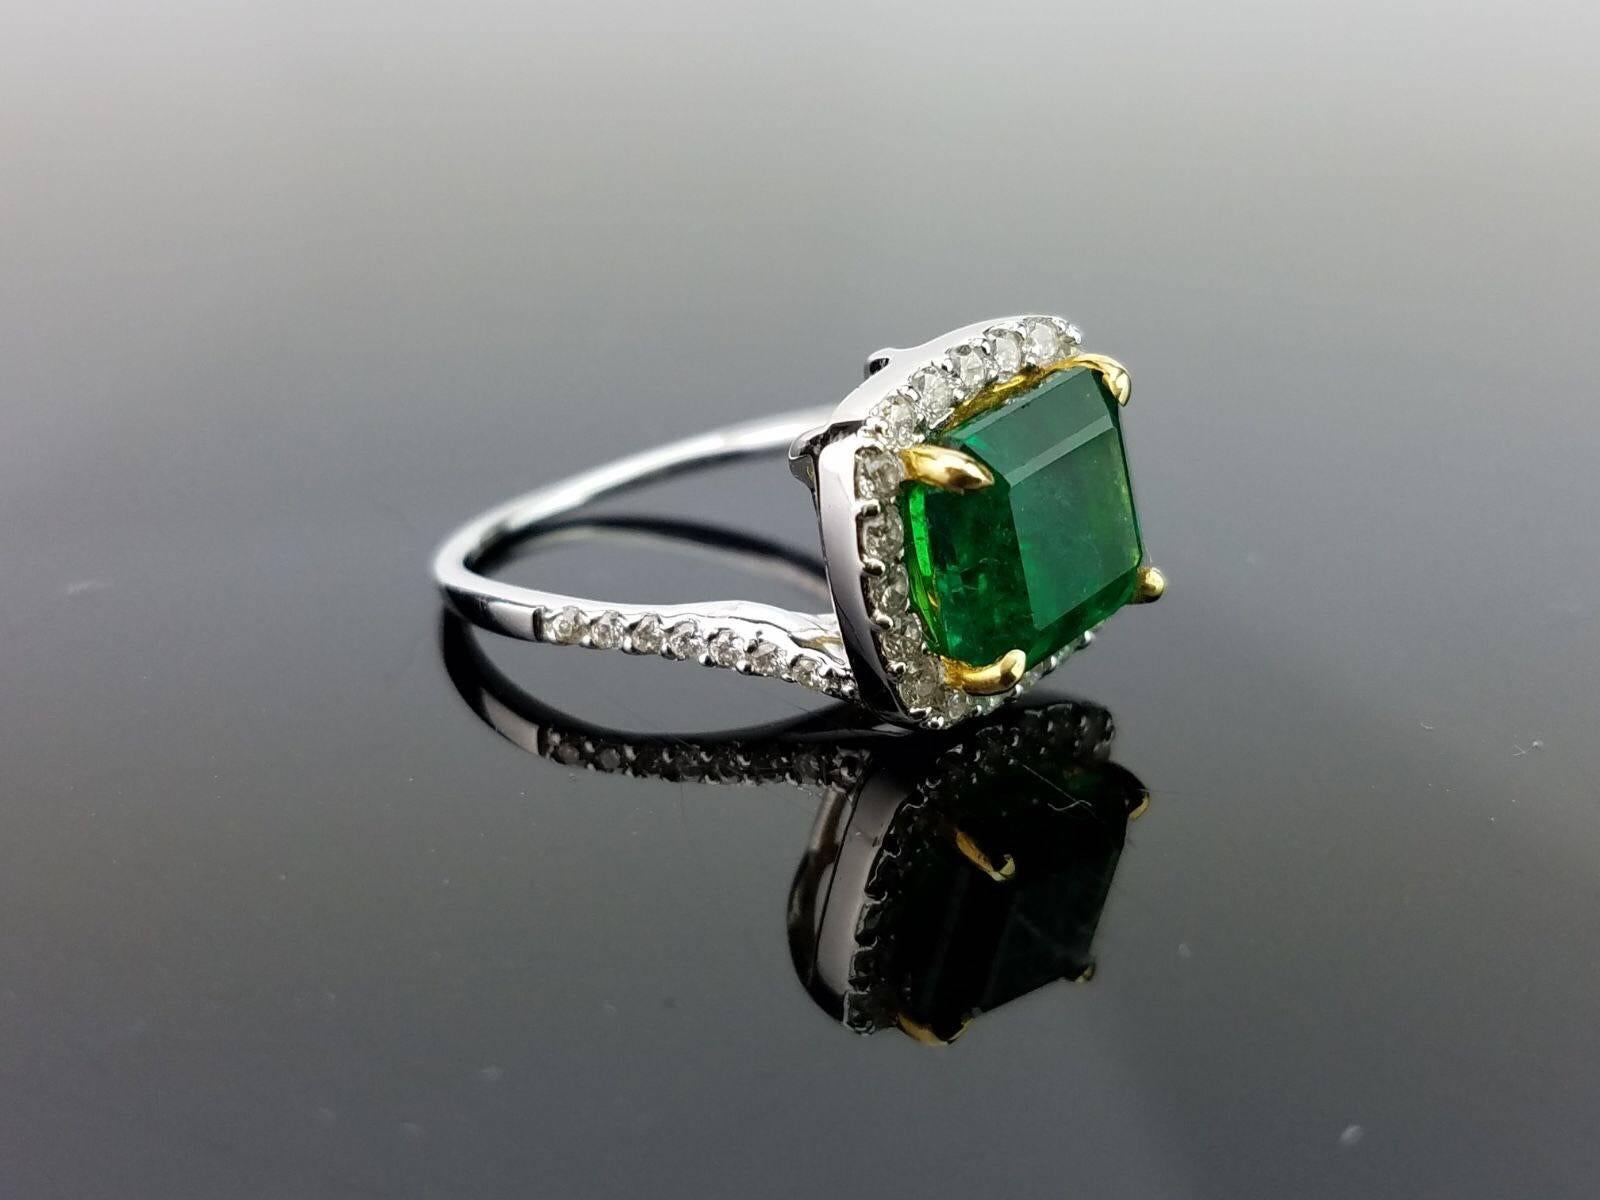 An elegant and simple cocktail ring using a lustrous emerald cut Zambian Emerald centre stone surrounded by brilliant cut white Diamonds, all set in 18K white and yellow gold. 

Stone Details: 
Stone: Zambian Emerald
Carat Weight: 2.77